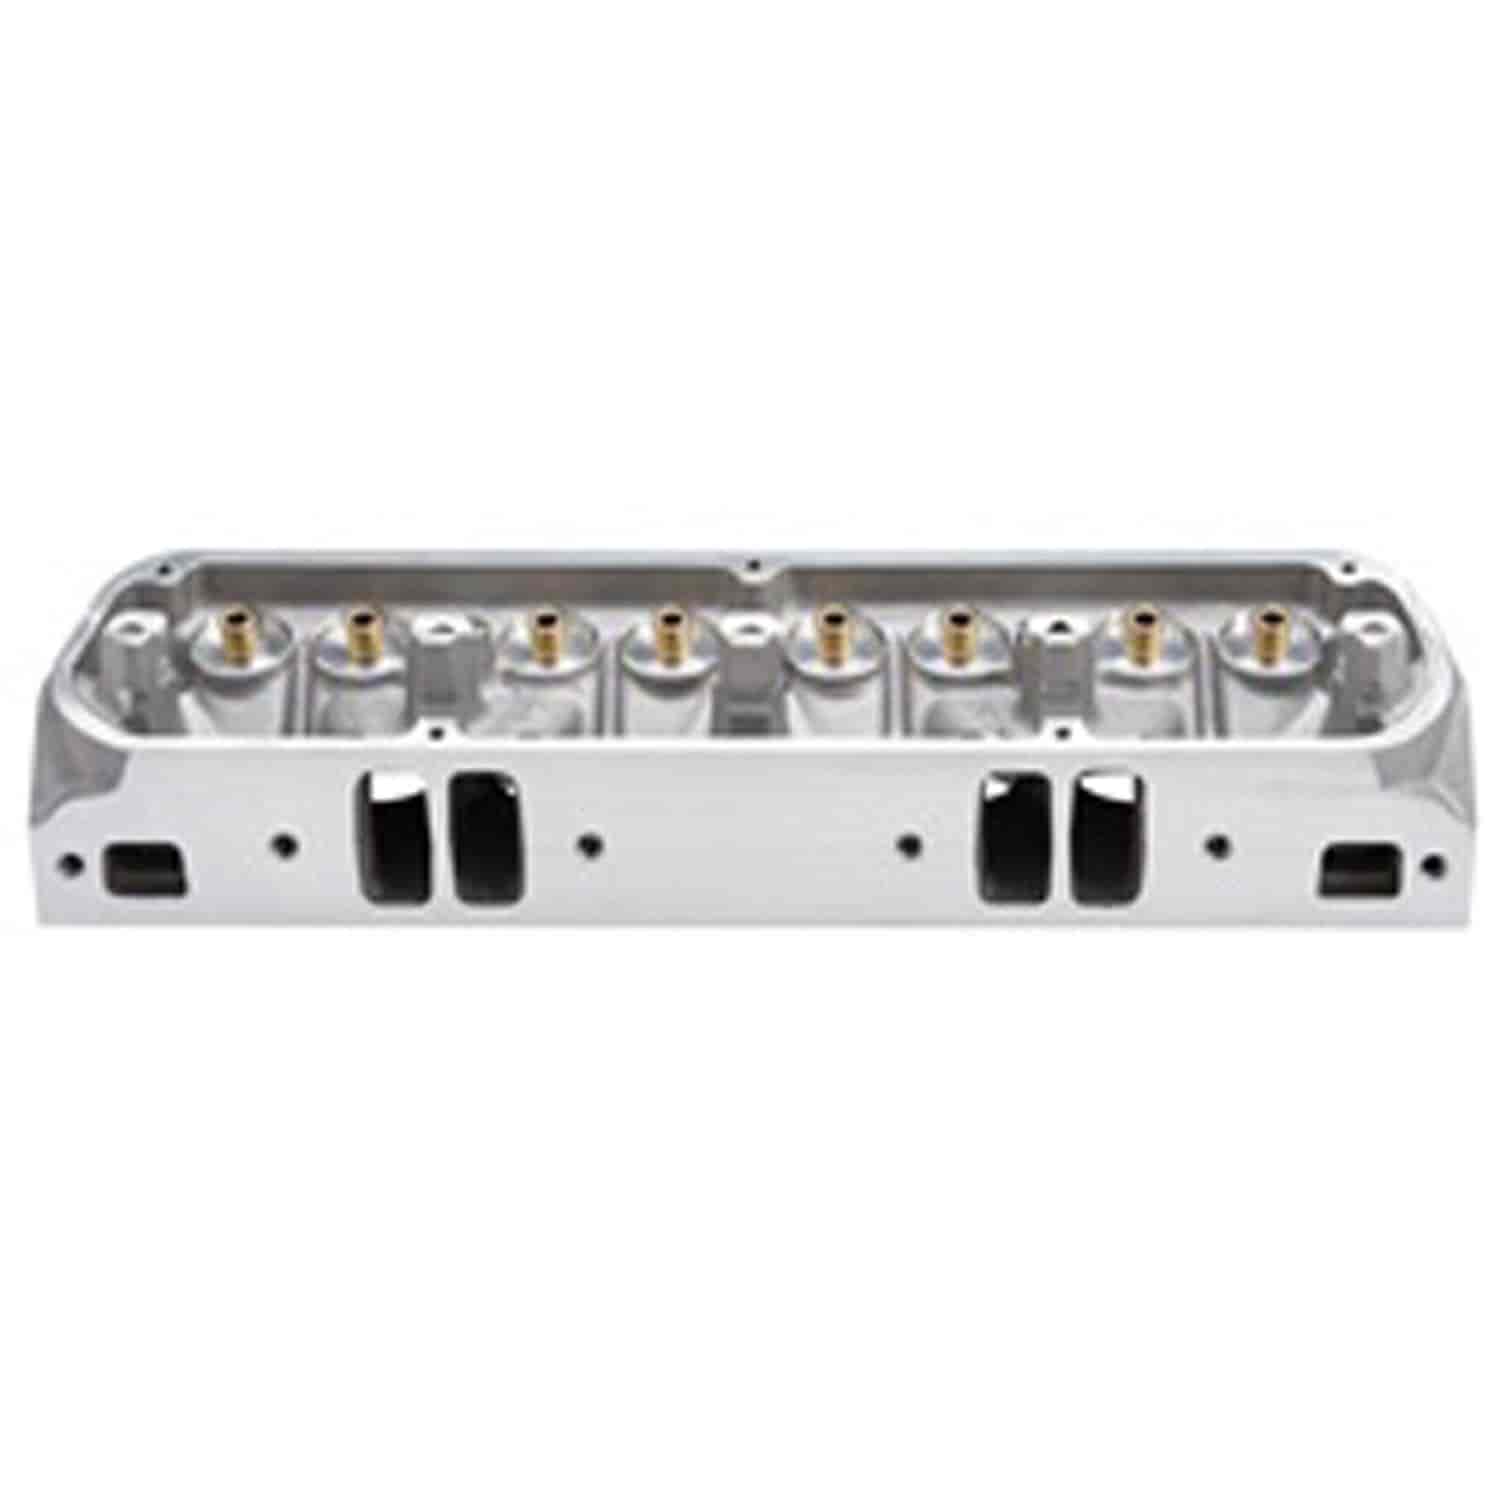 NHRA Performer RPM Cylinder head for Chryler 340 Small Block